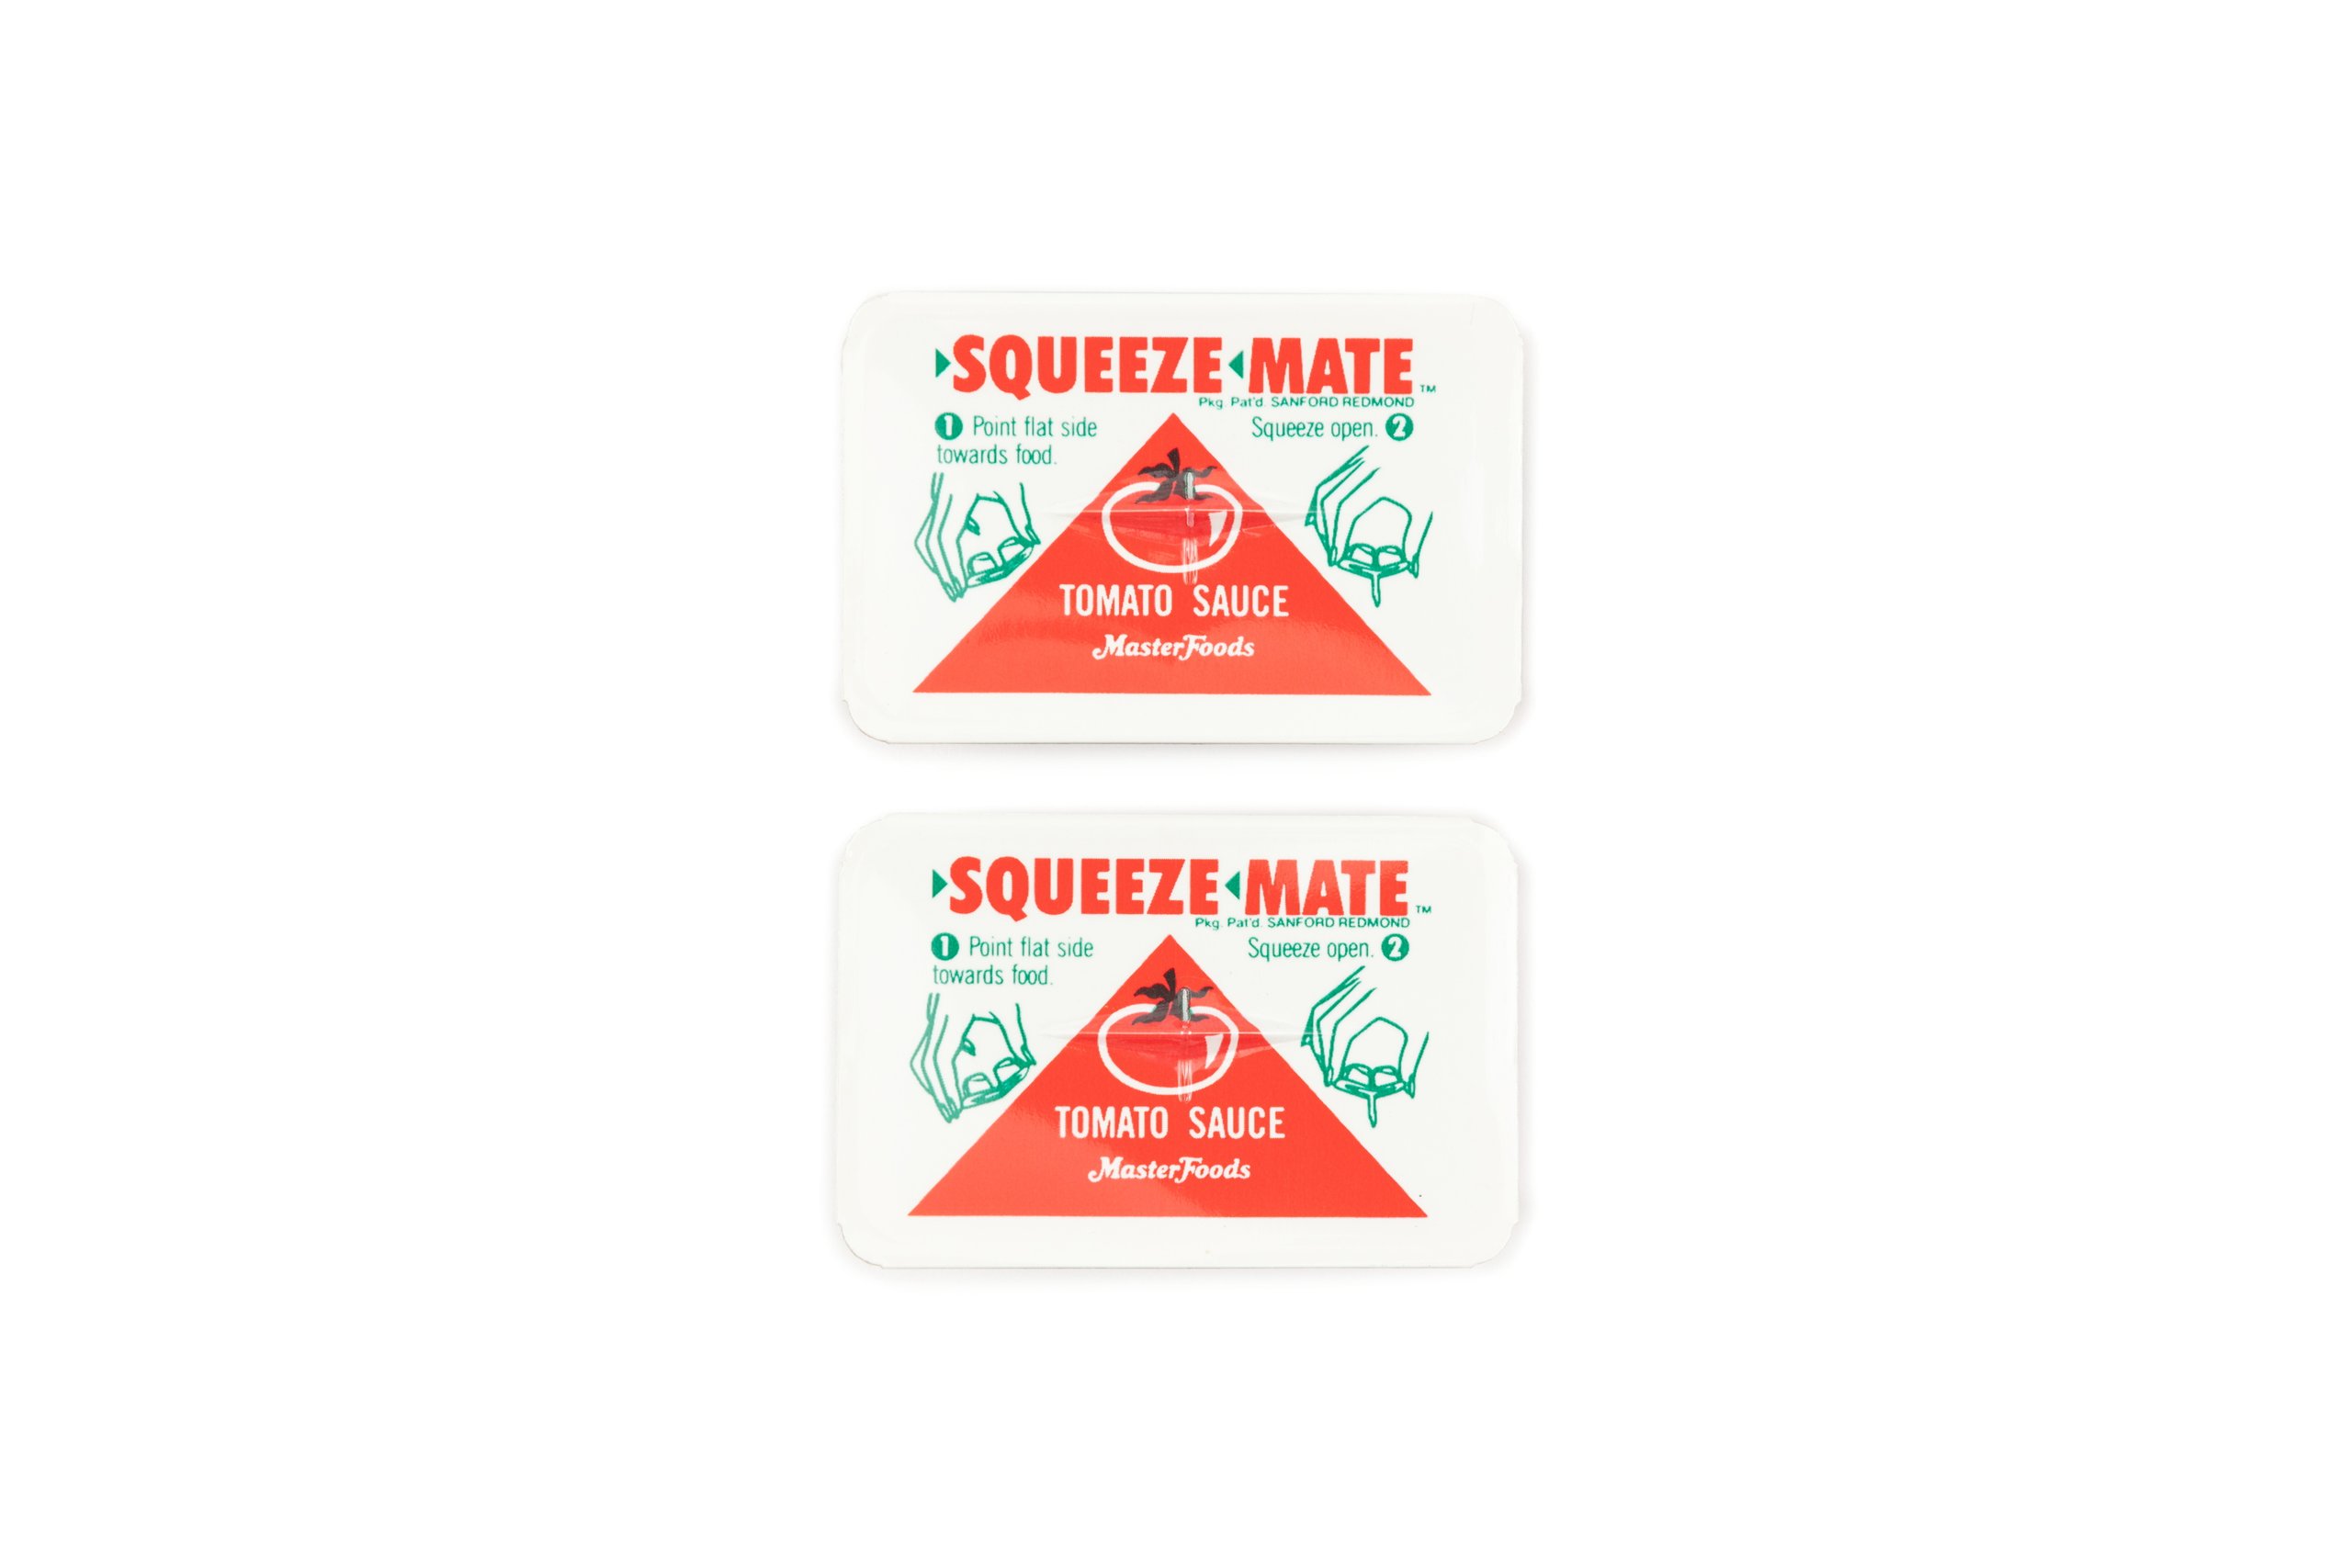 'Squeeze Mate' tomato sauce and packaging made by Conoflex